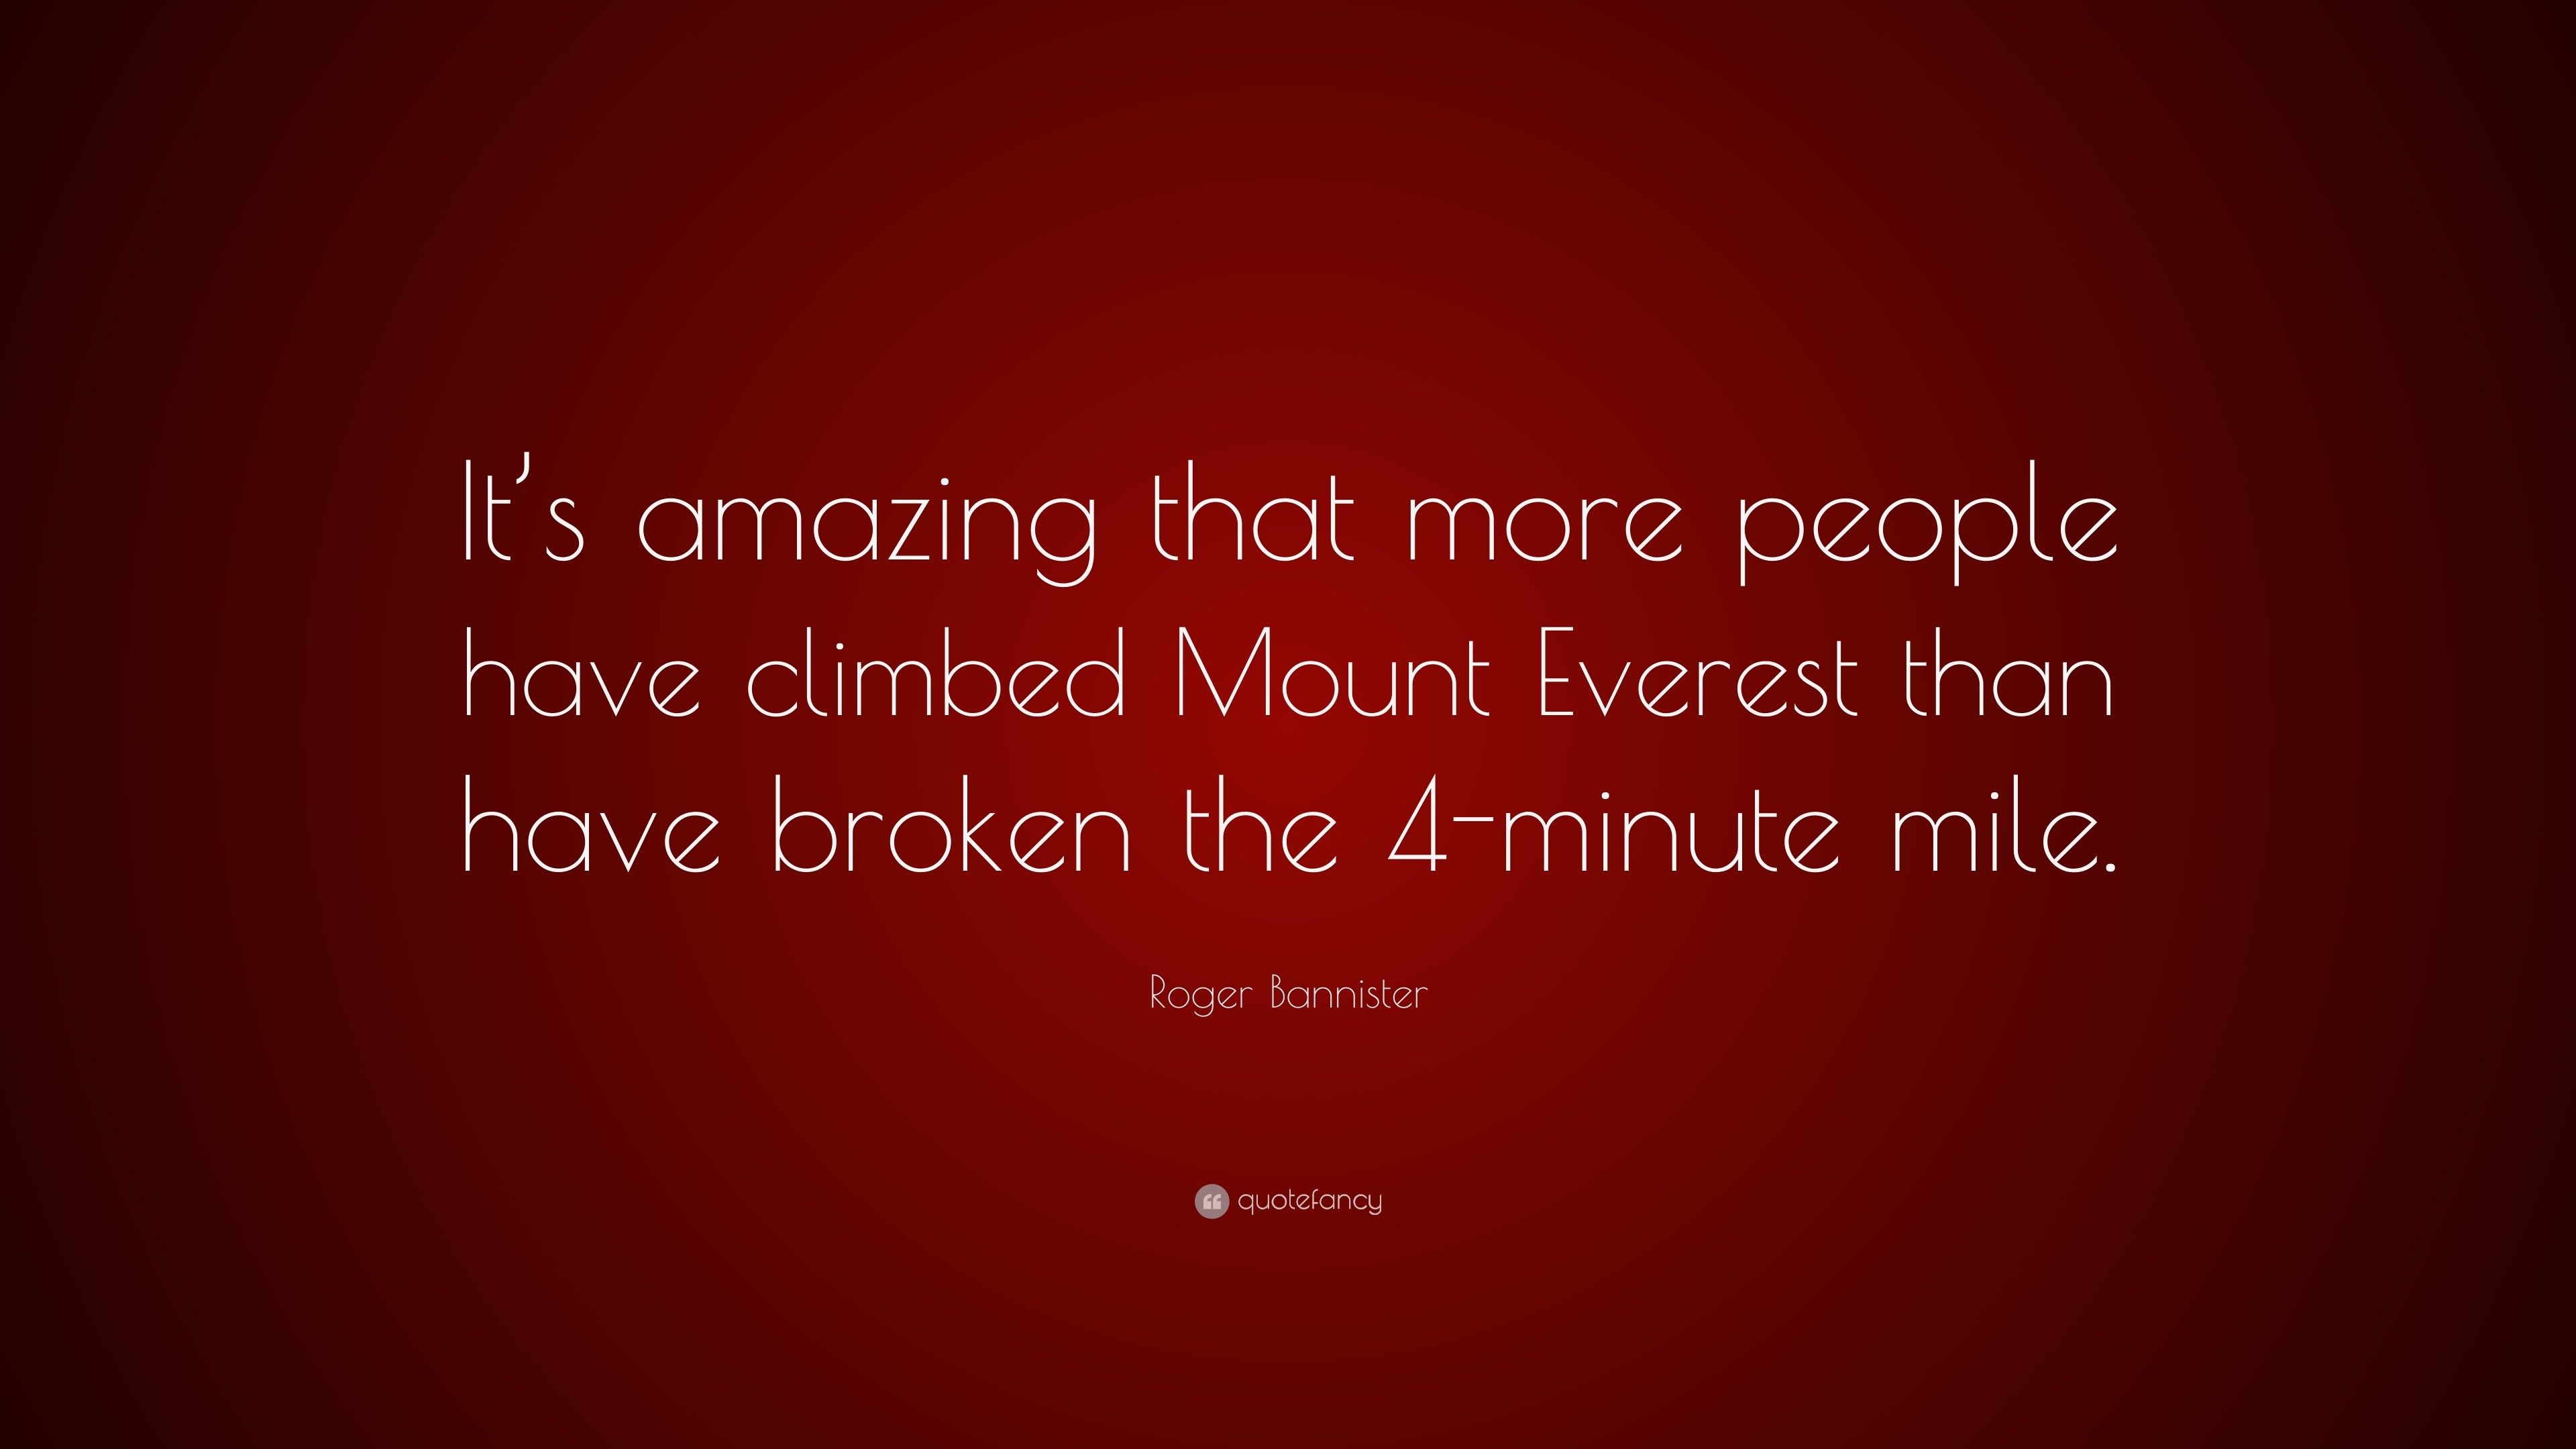 Roger Bannister Quote: “It’s amazing that more people have climbed